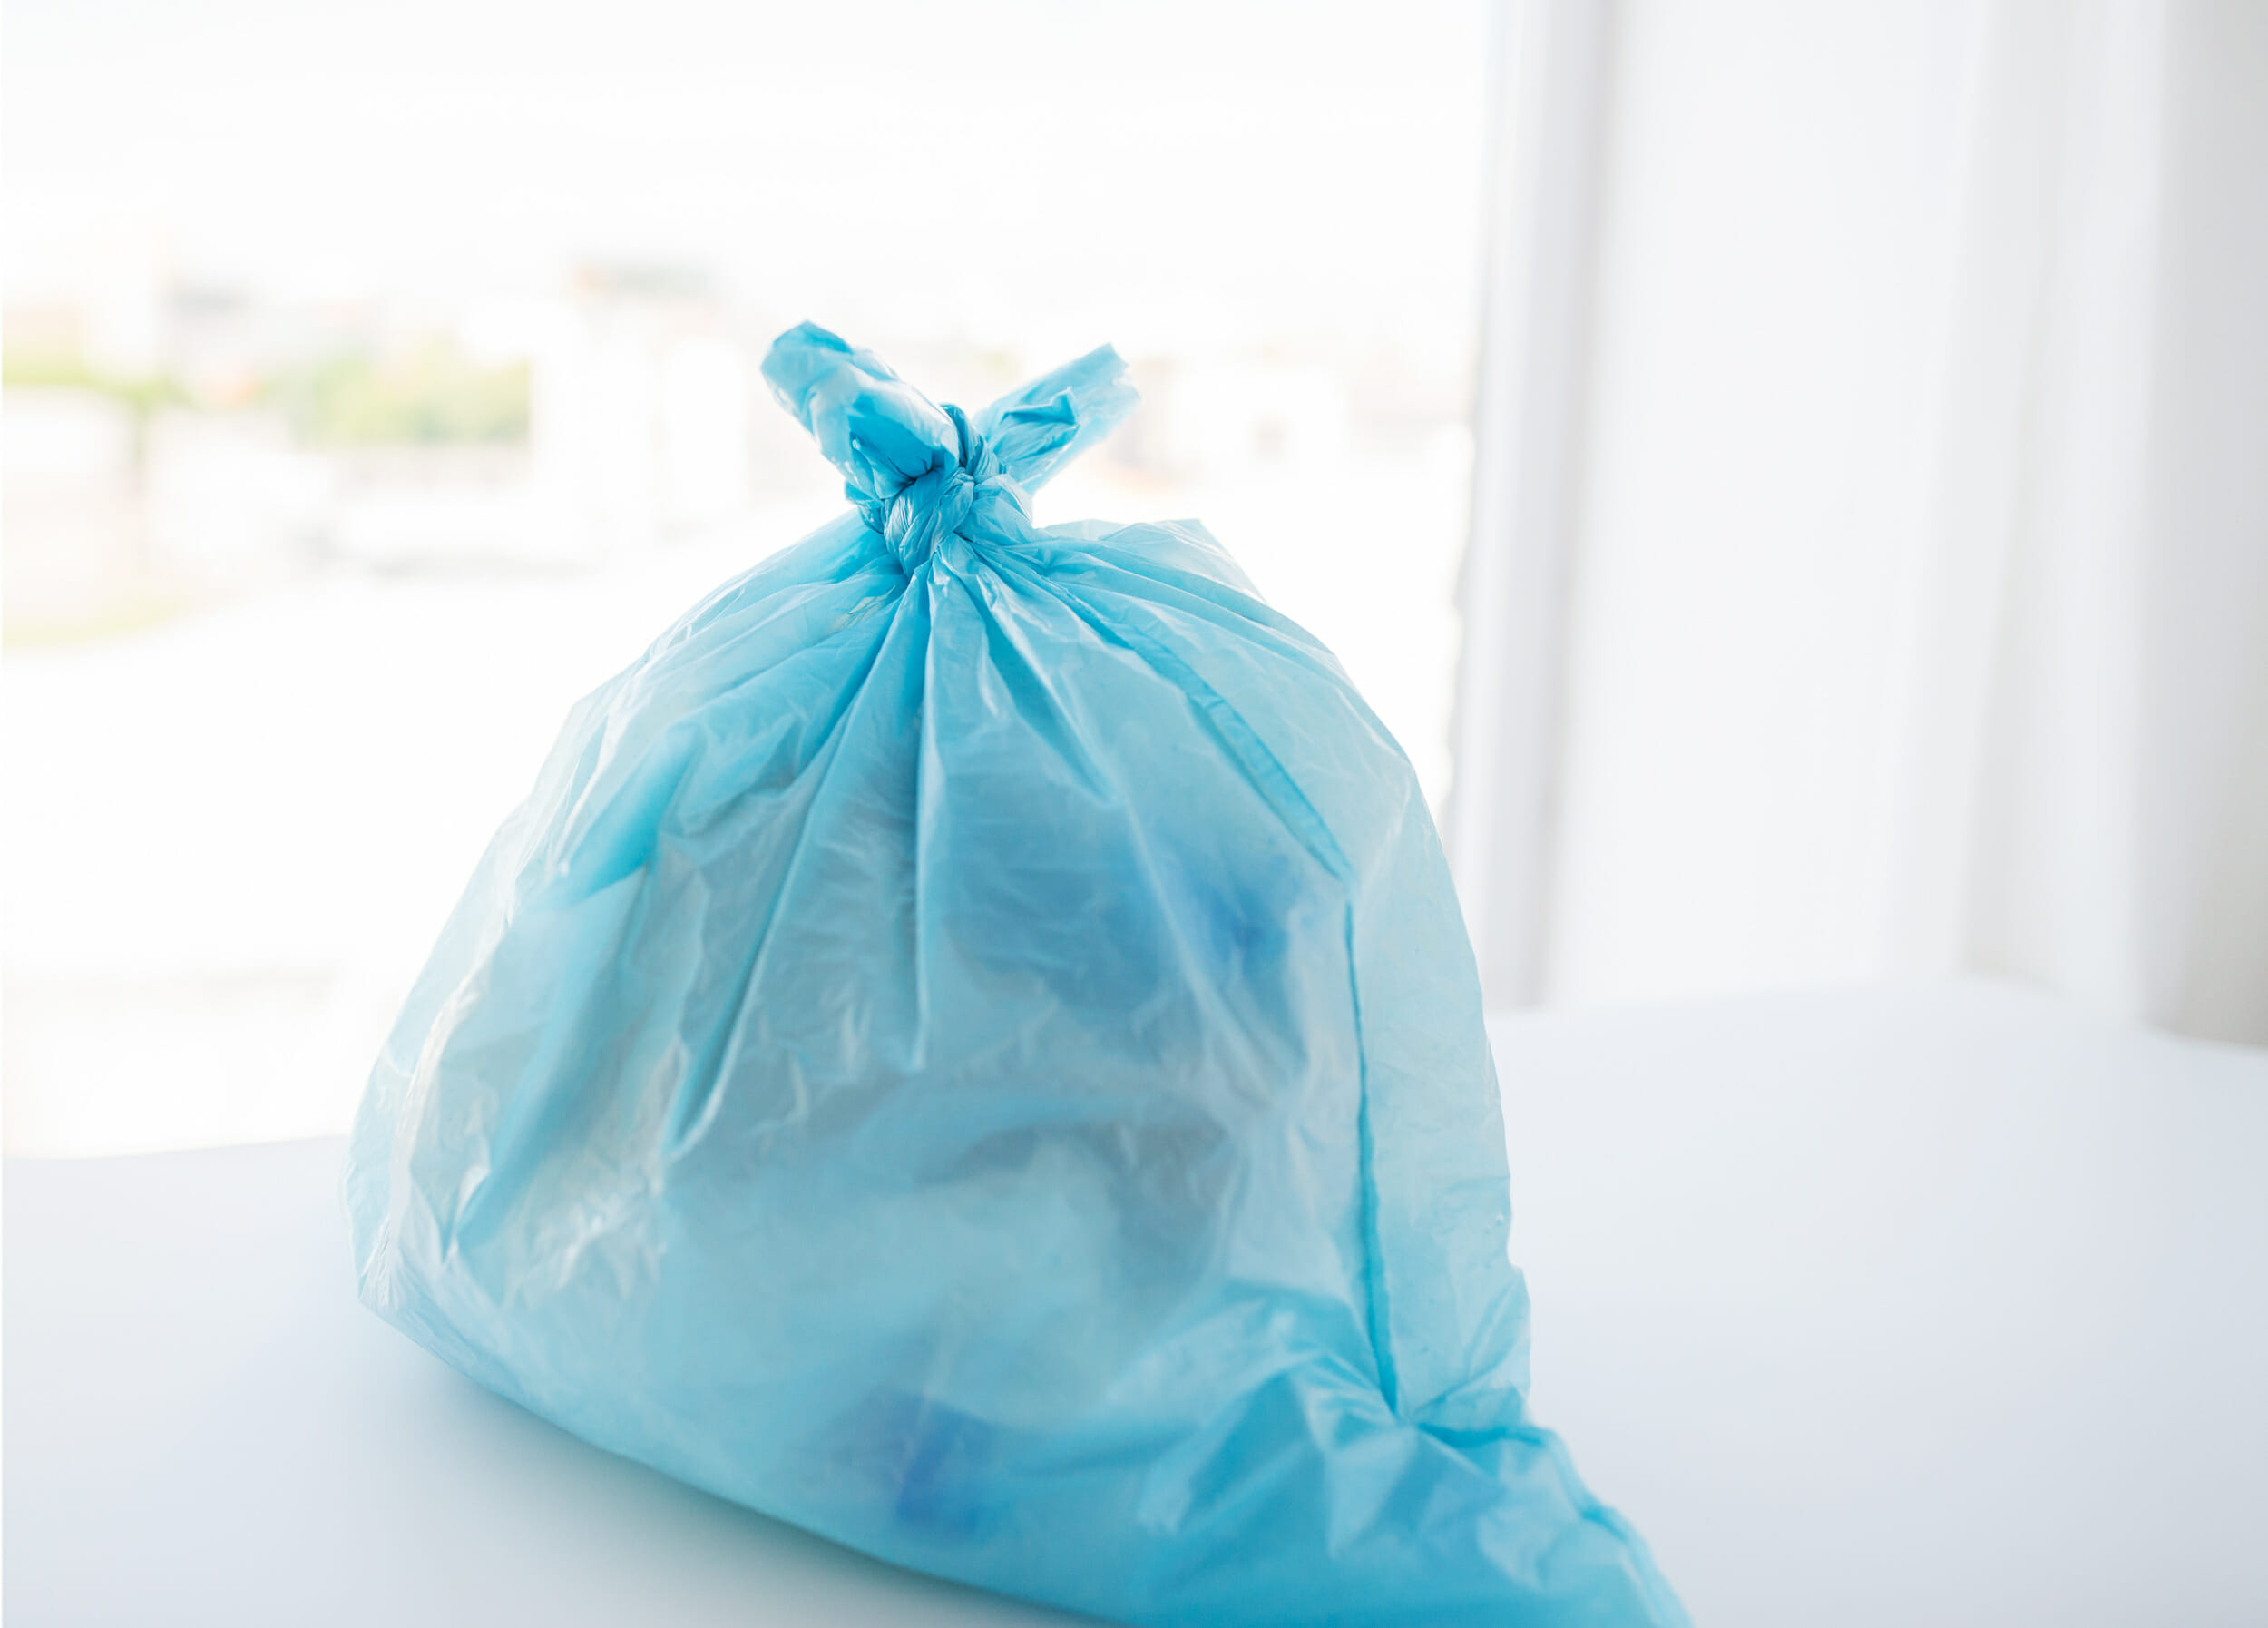 Bin bag safety: Be mindful of what you dispose of